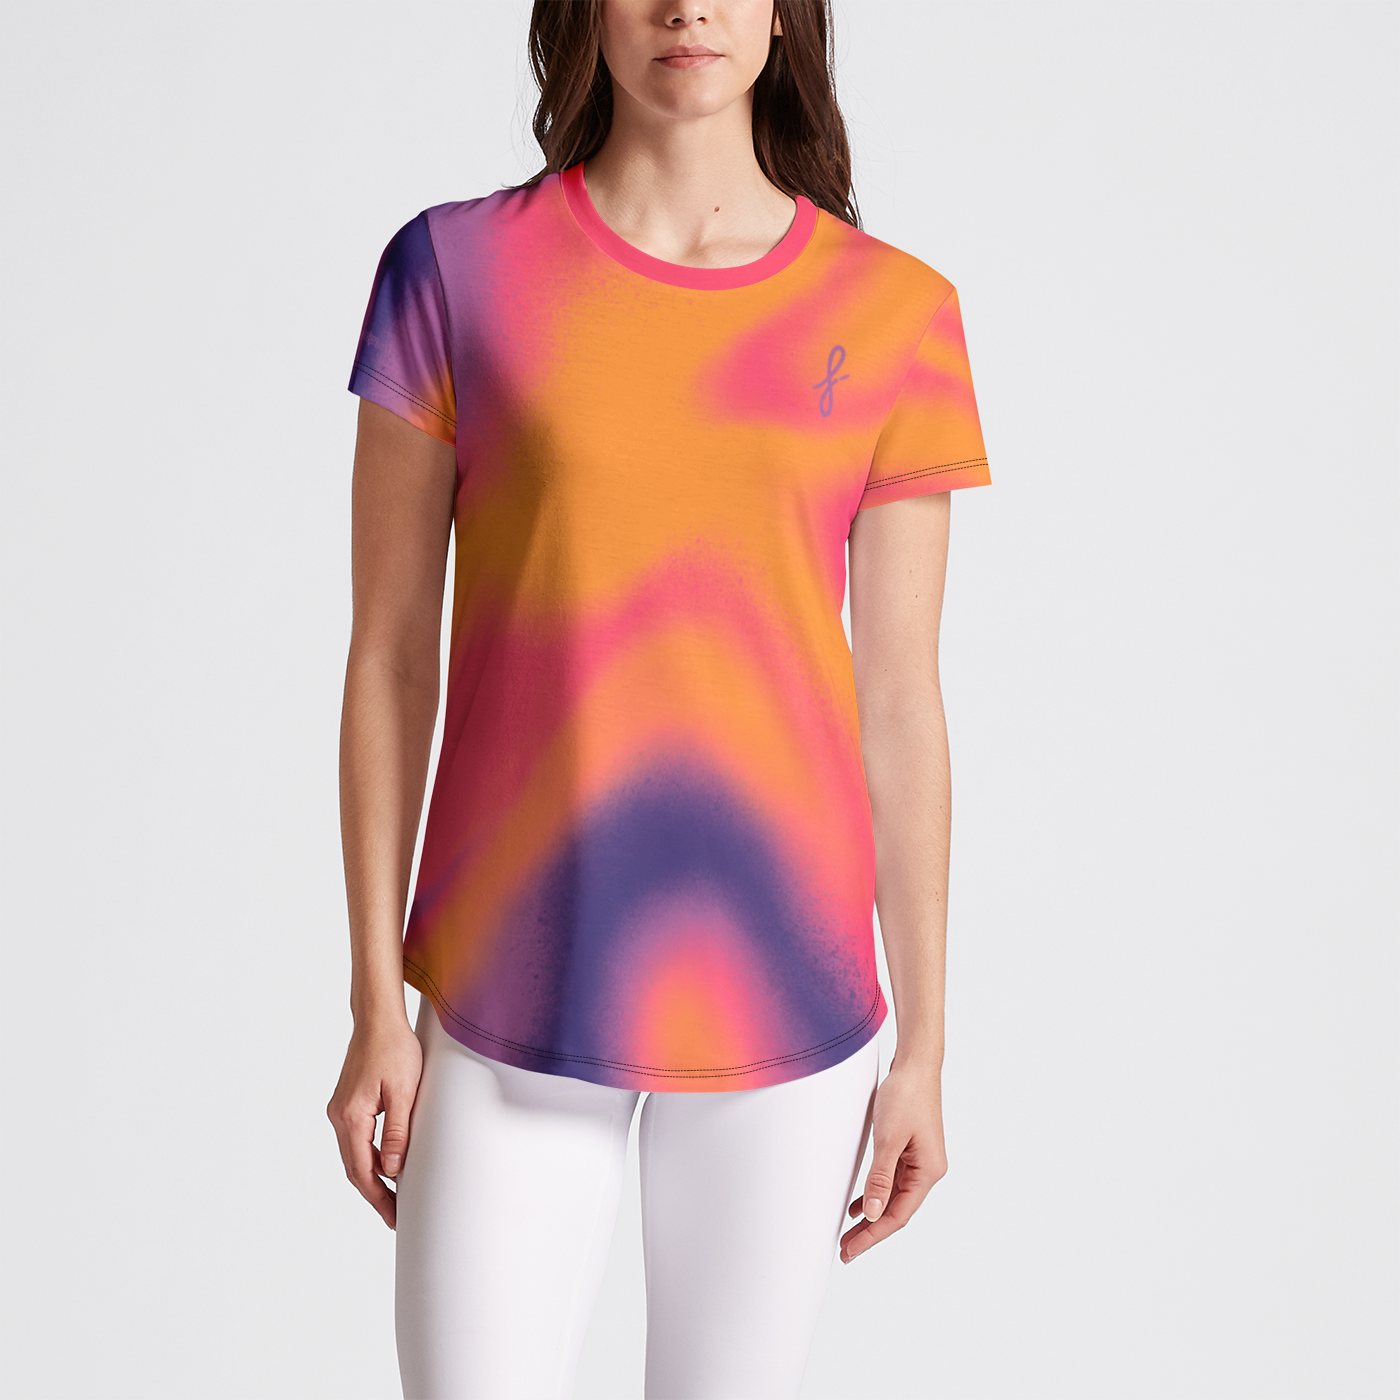 WOMEN'S SOLPRO TEAM HOT ROUND THERMAL